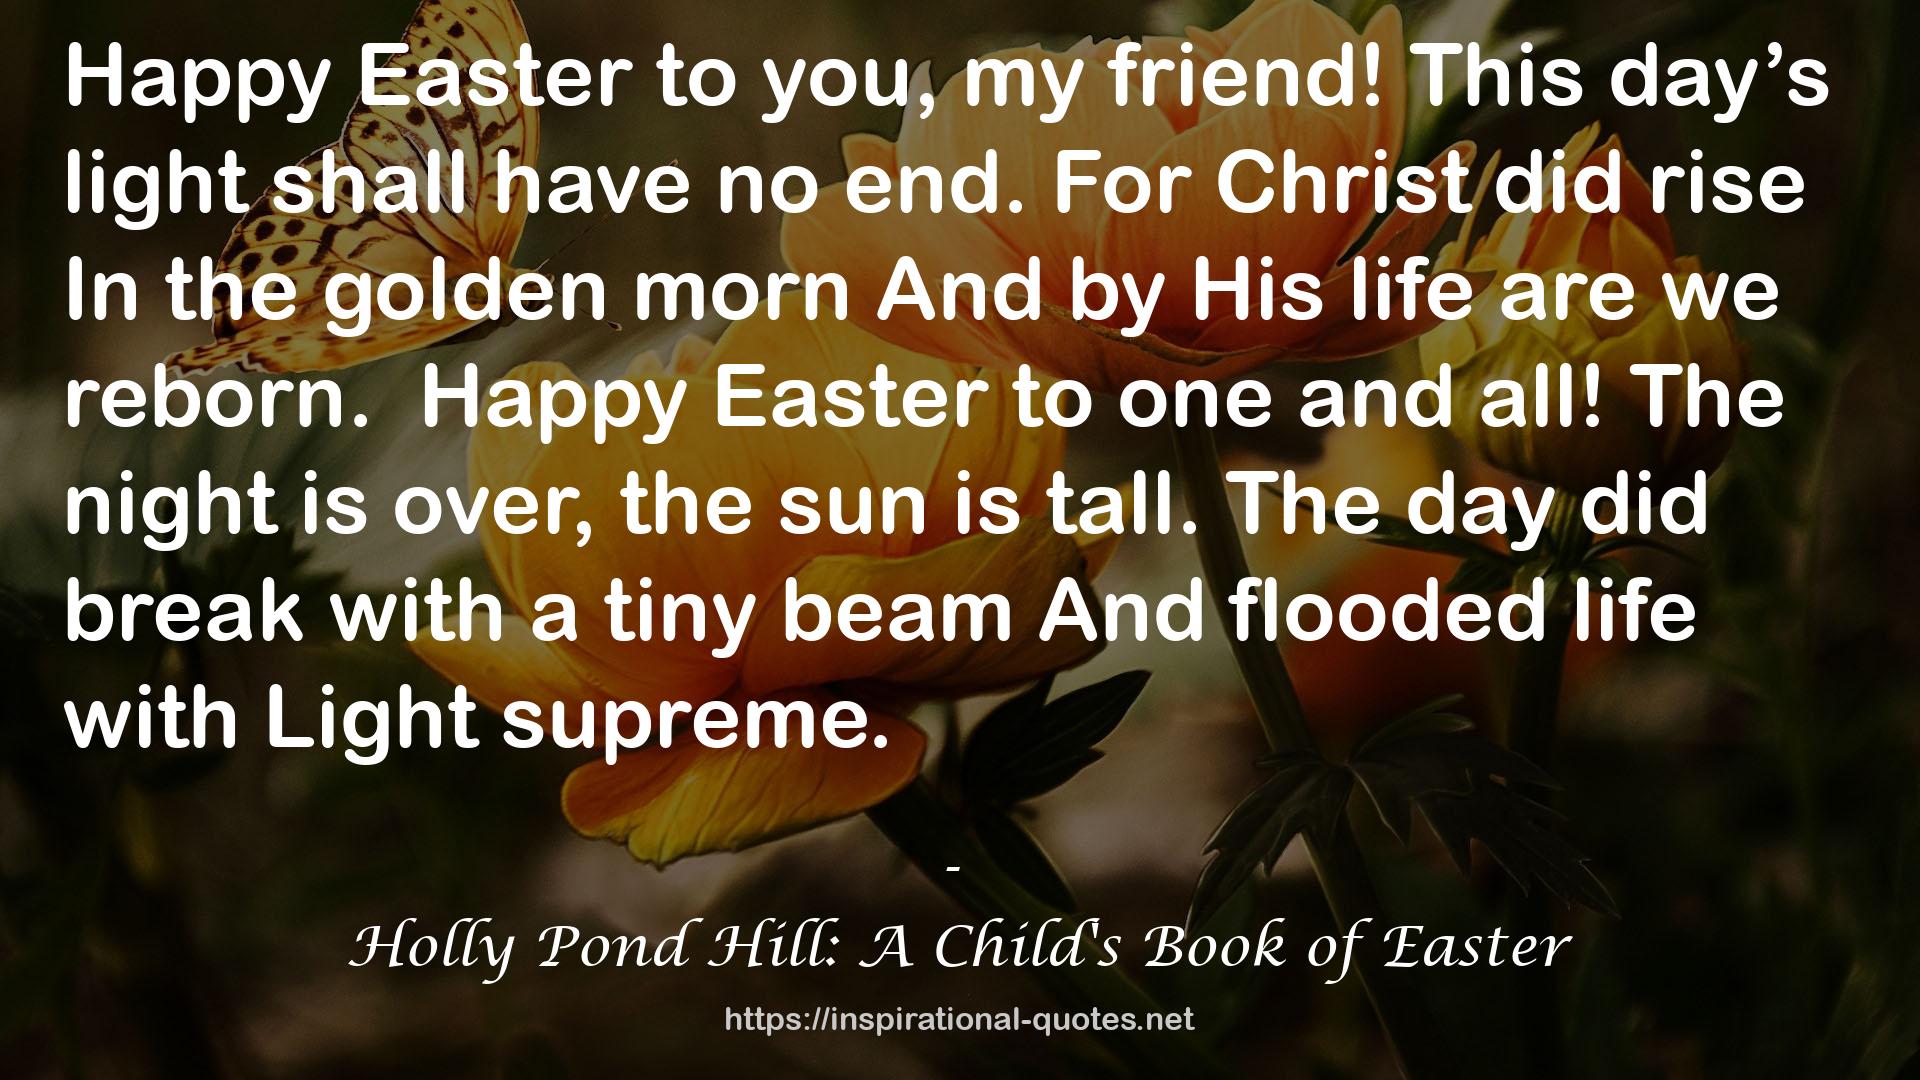 Holly Pond Hill: A Child's Book of Easter QUOTES